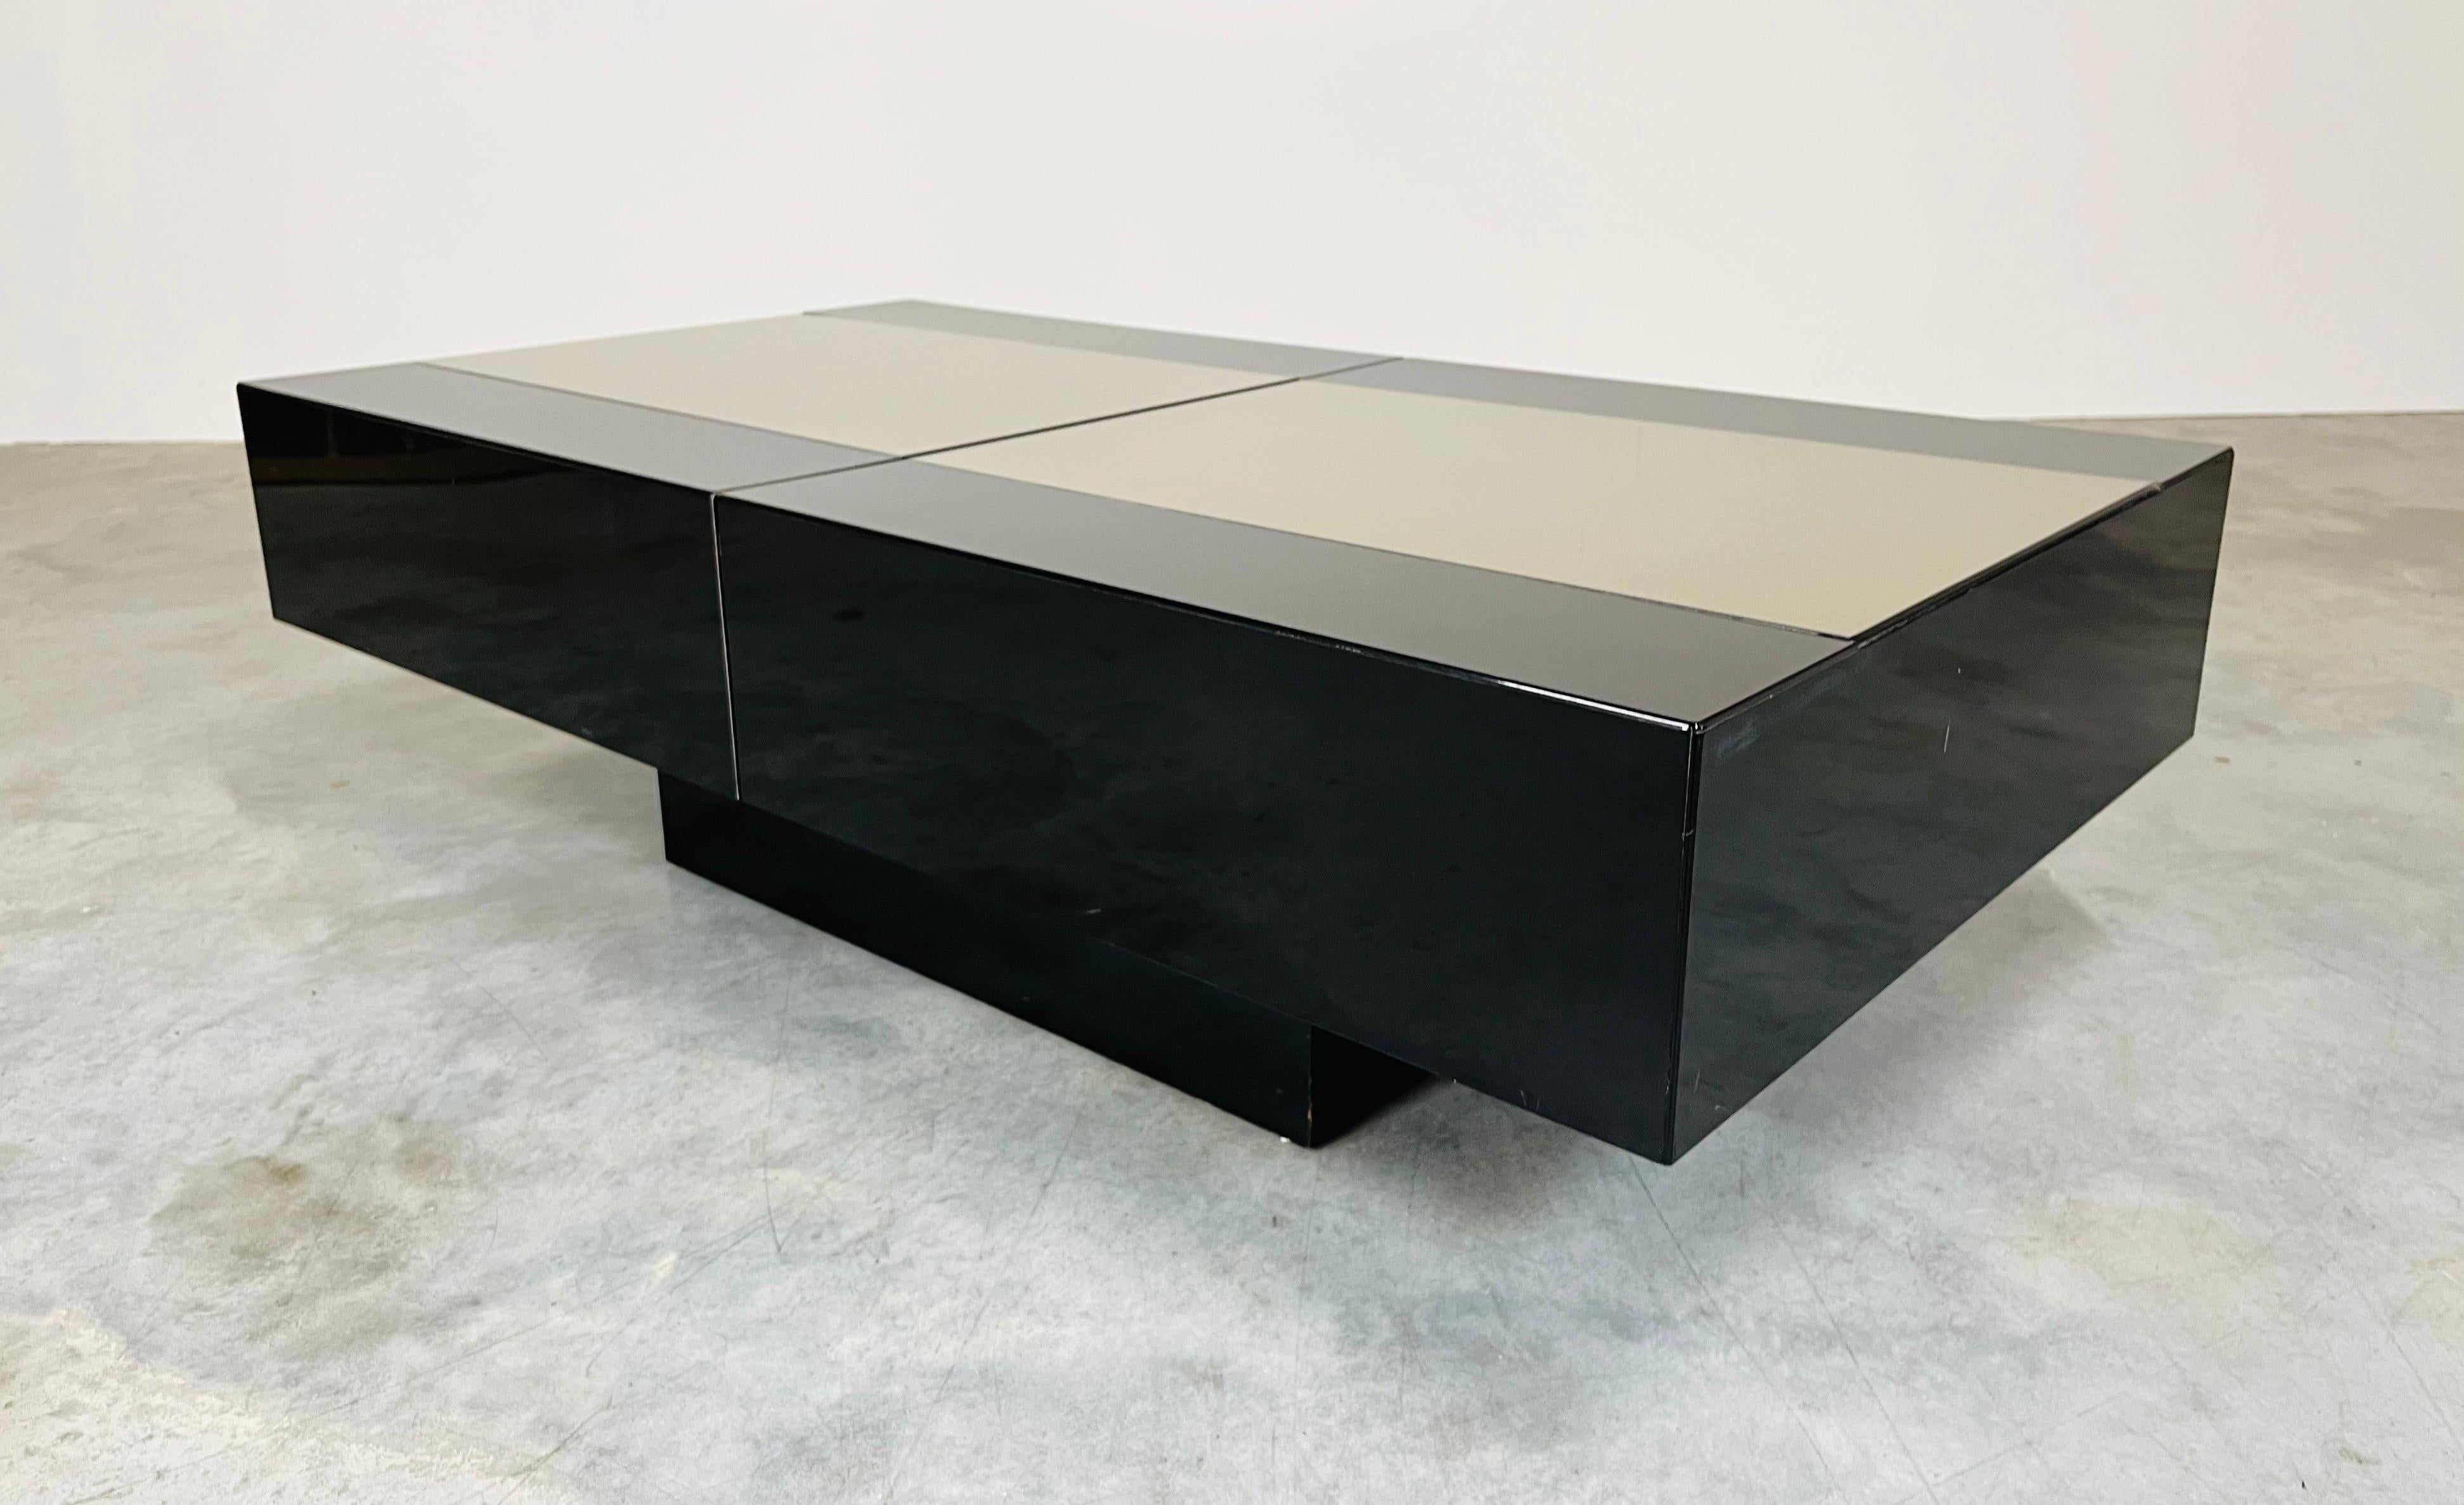 A beautiful multi-functional coffee table that opens up to reveal a hidden dry bar with deep storage for bottles and interior shelf storage for glasses having black lacquer case with light gold mirror center designed by Eric Maville and Jean Claude